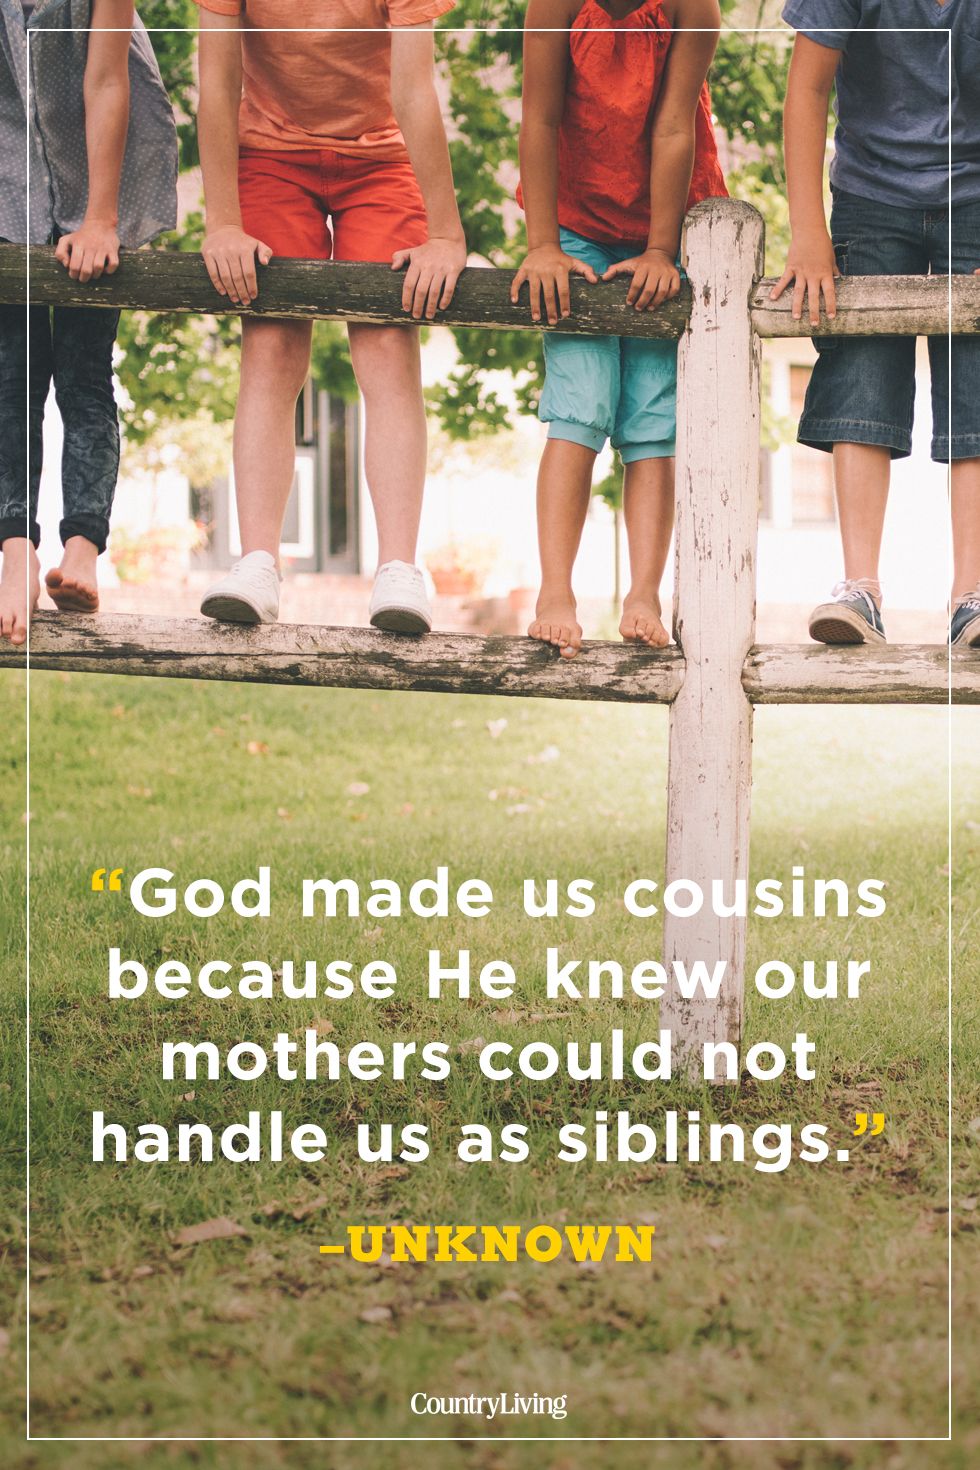 19 Best Cousin Quotes - Funny Quotes About Cousins and Family